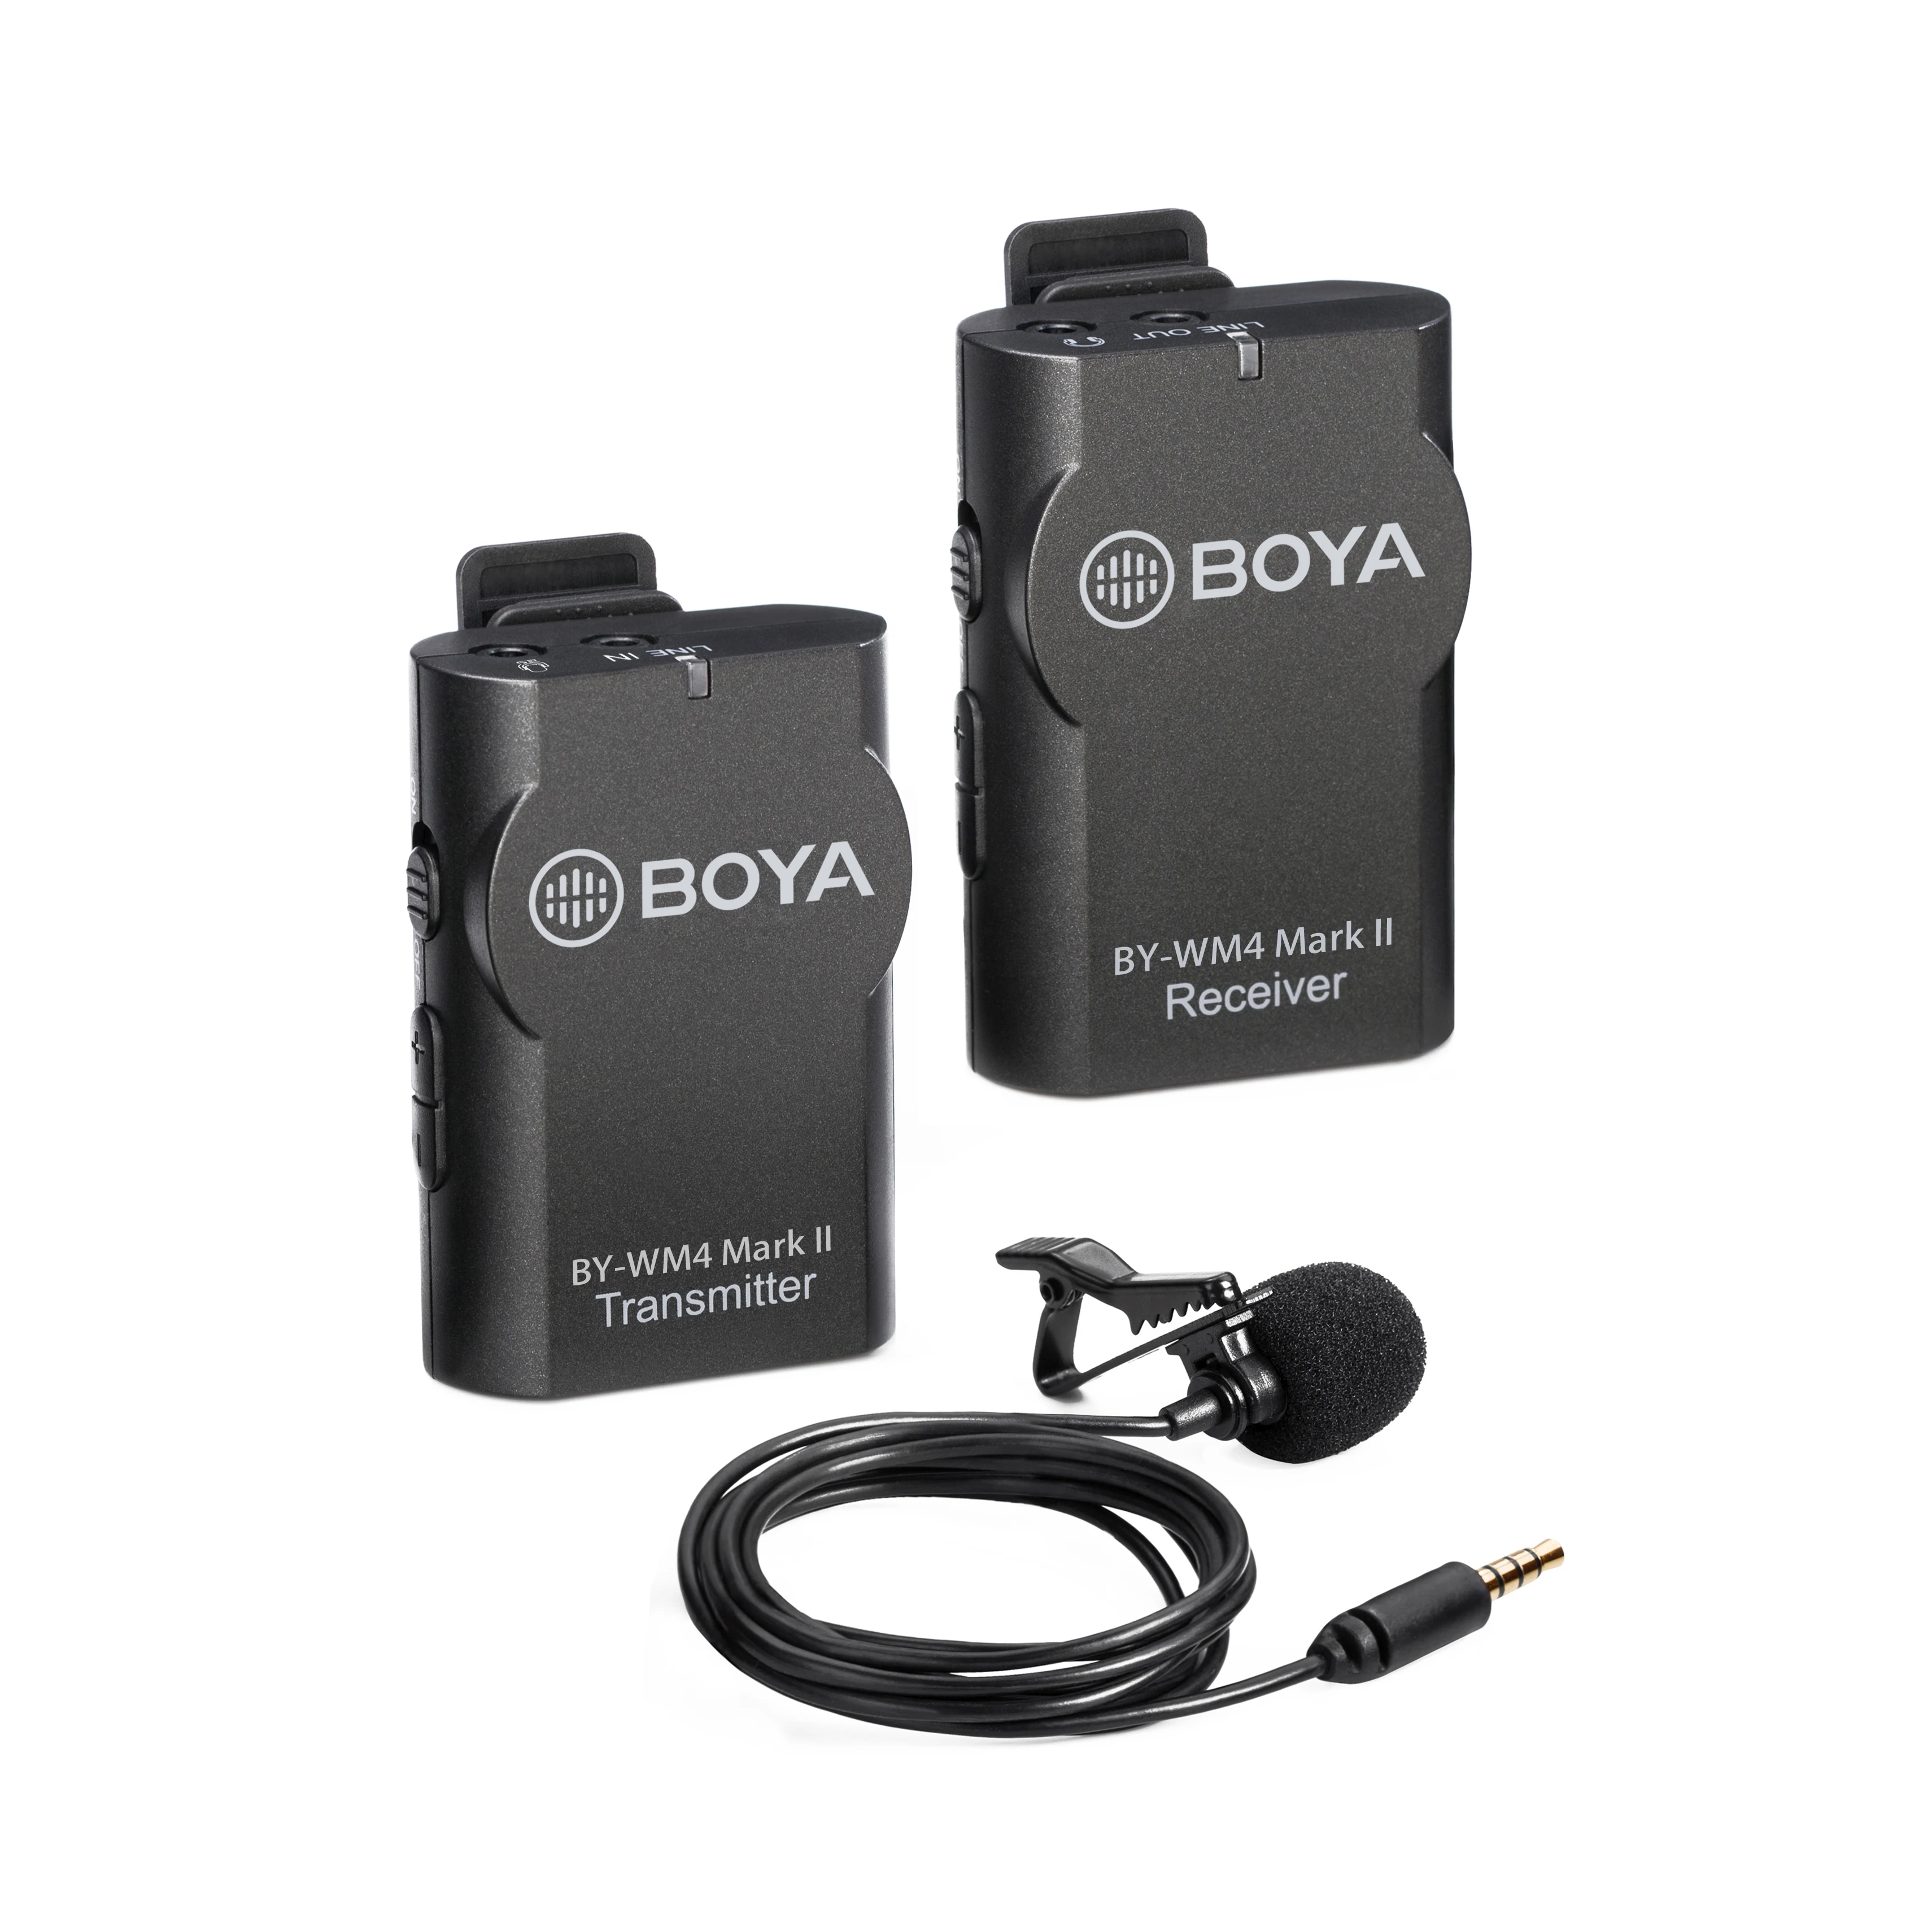 

Boya BY-WM4 Mark II Wireless Microphone System Condenser Lavalier Lapel Interview Microphone for iPhone Canon Nikon DSLR Camera